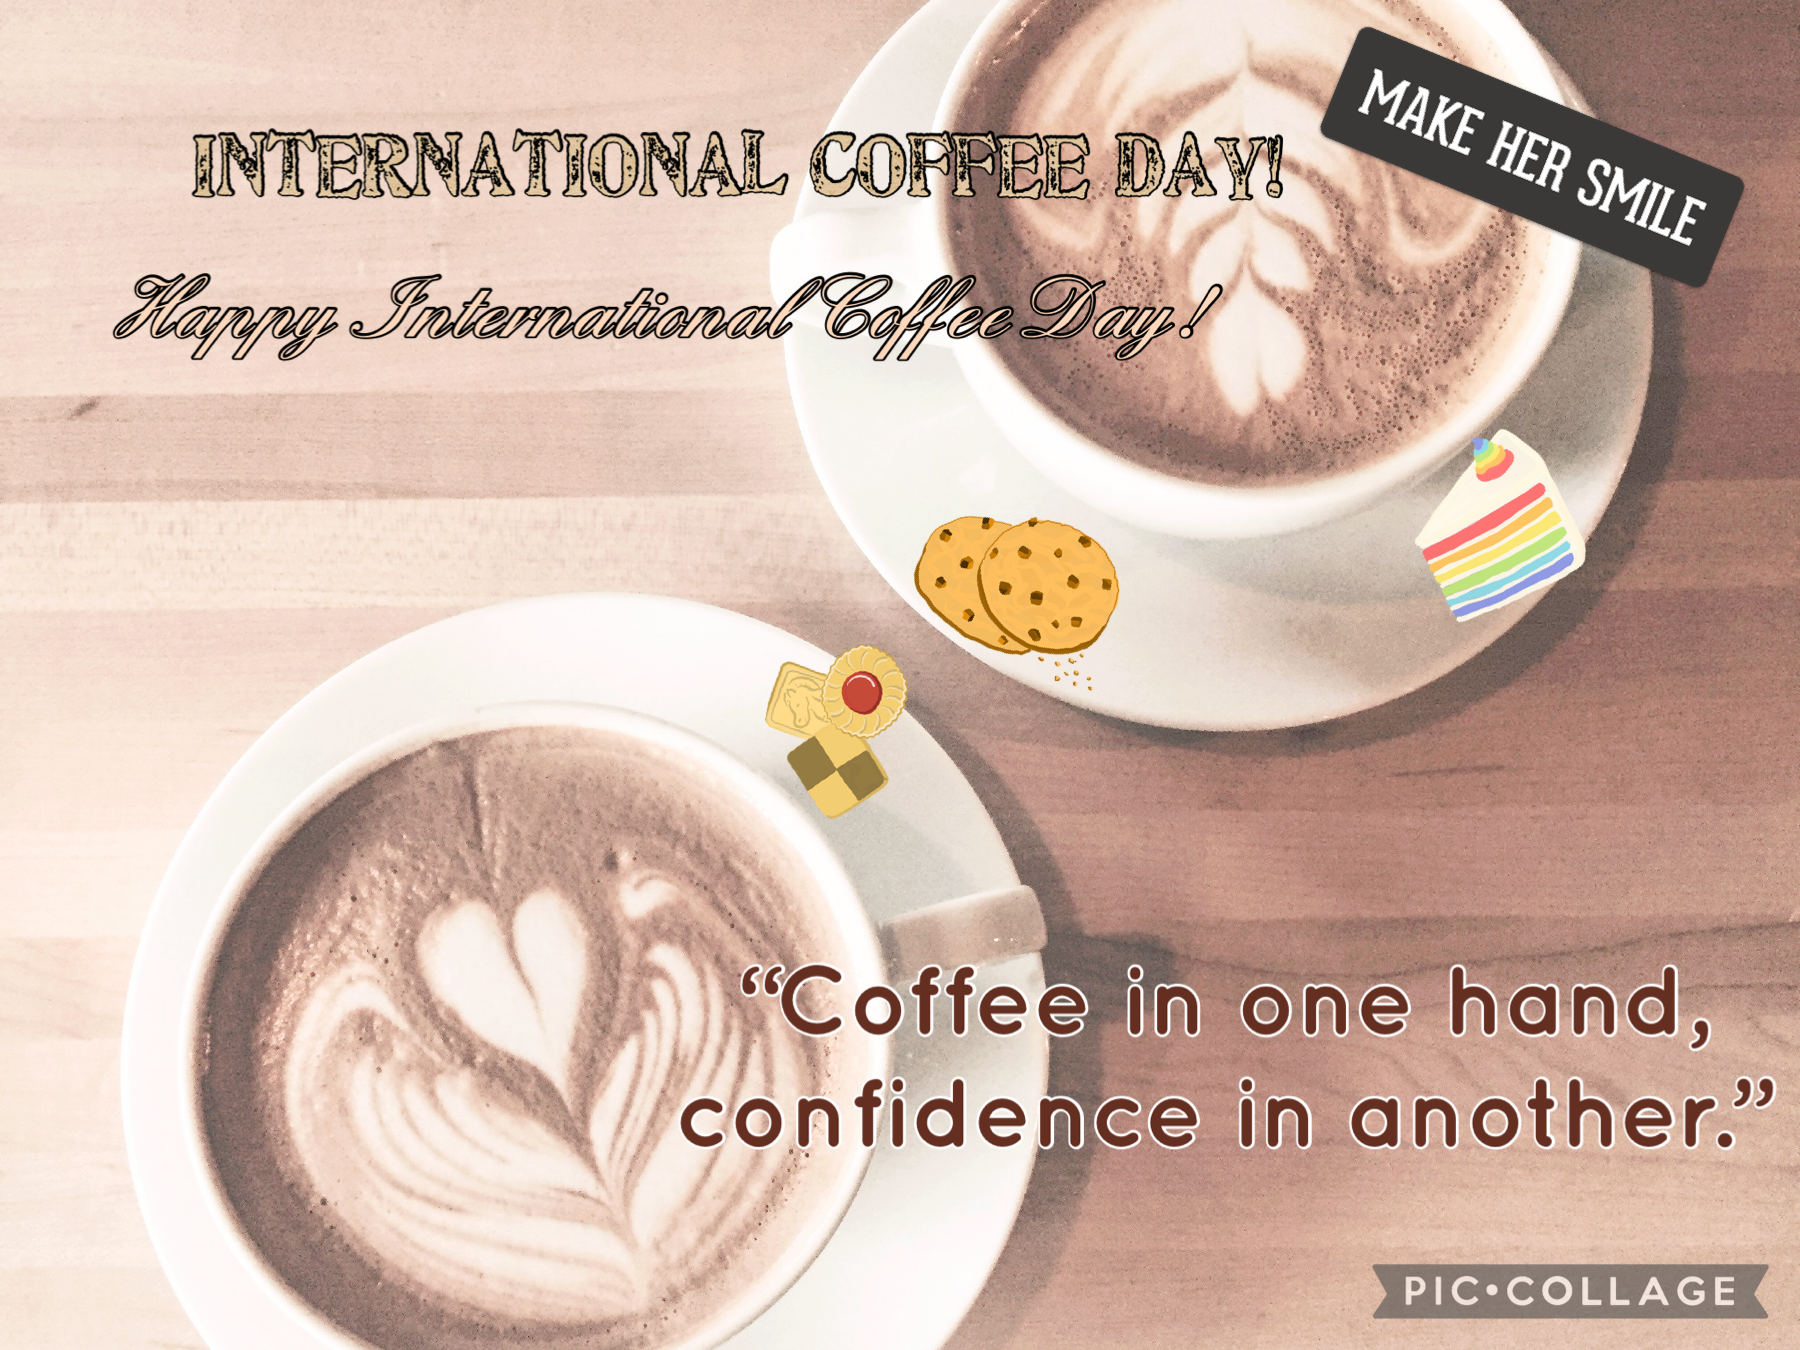 Tap me!!
Today is International Coffee Day! Enjoy having coffee (if your old enough too) and why not add a treat or two?